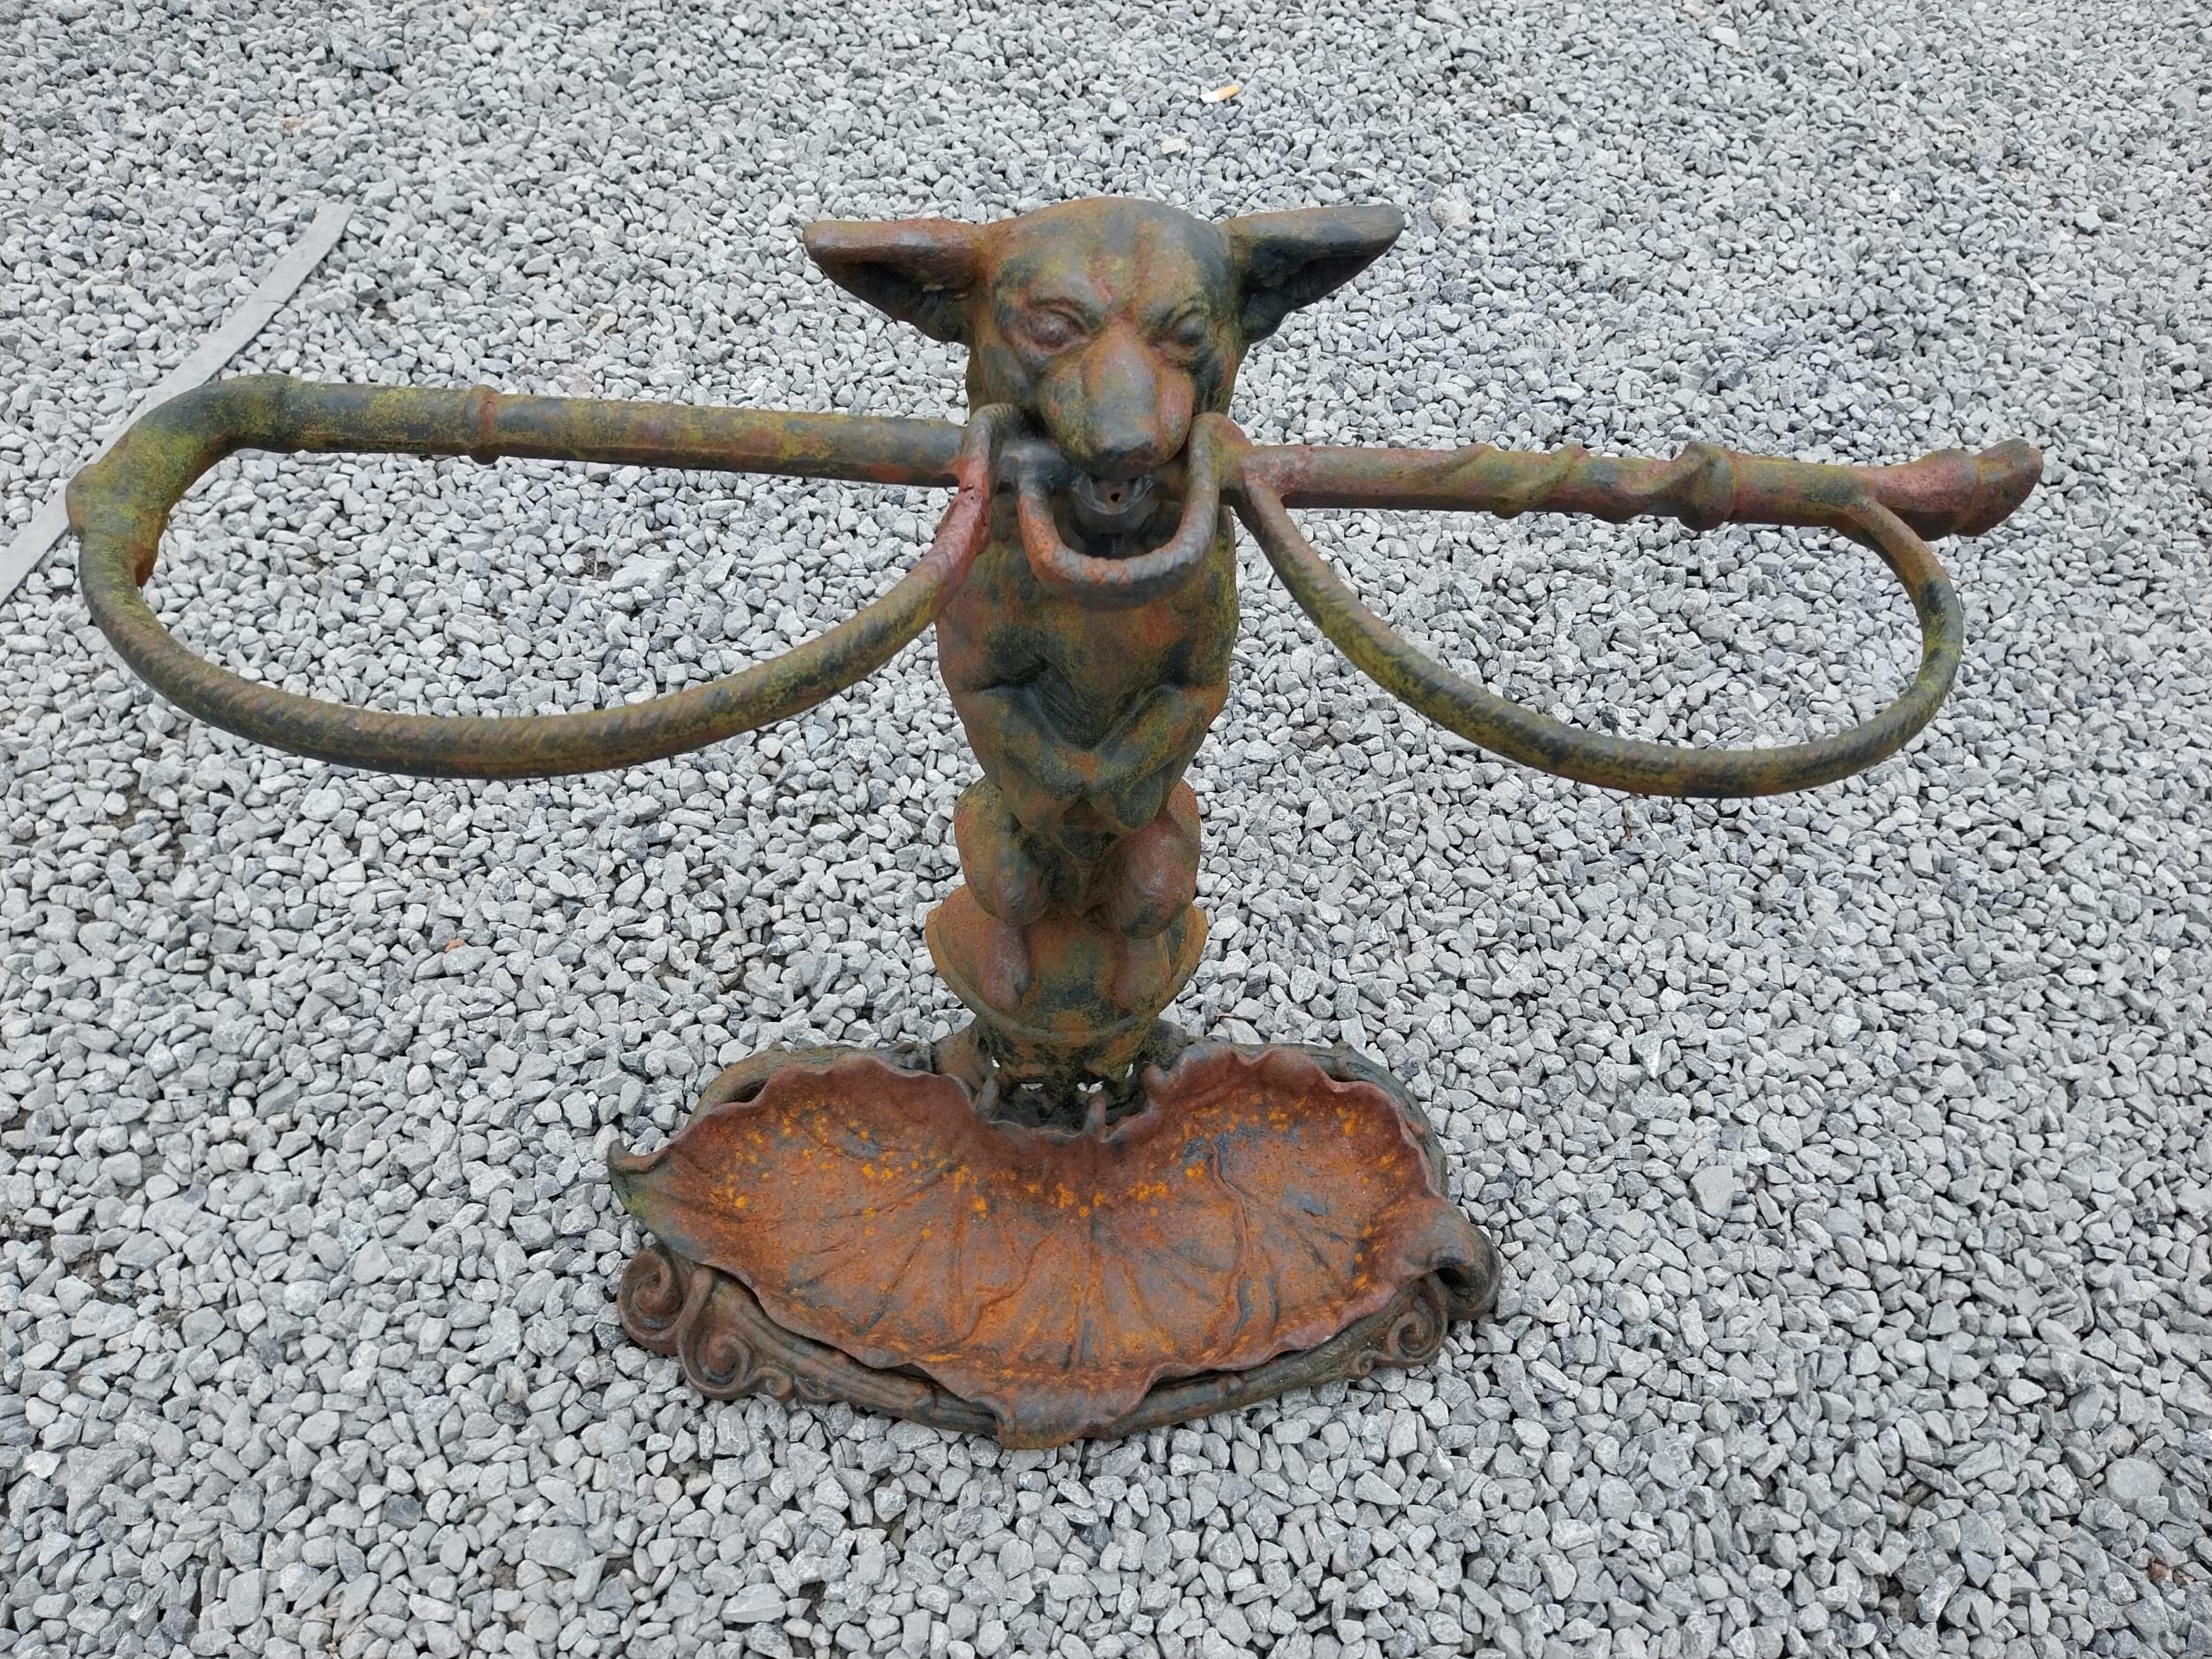 Cast iron stick stand depicting a dog in the Coalbrookdale style {58 cm H x 60 cm W x 20 cm D}. - Image 5 of 6